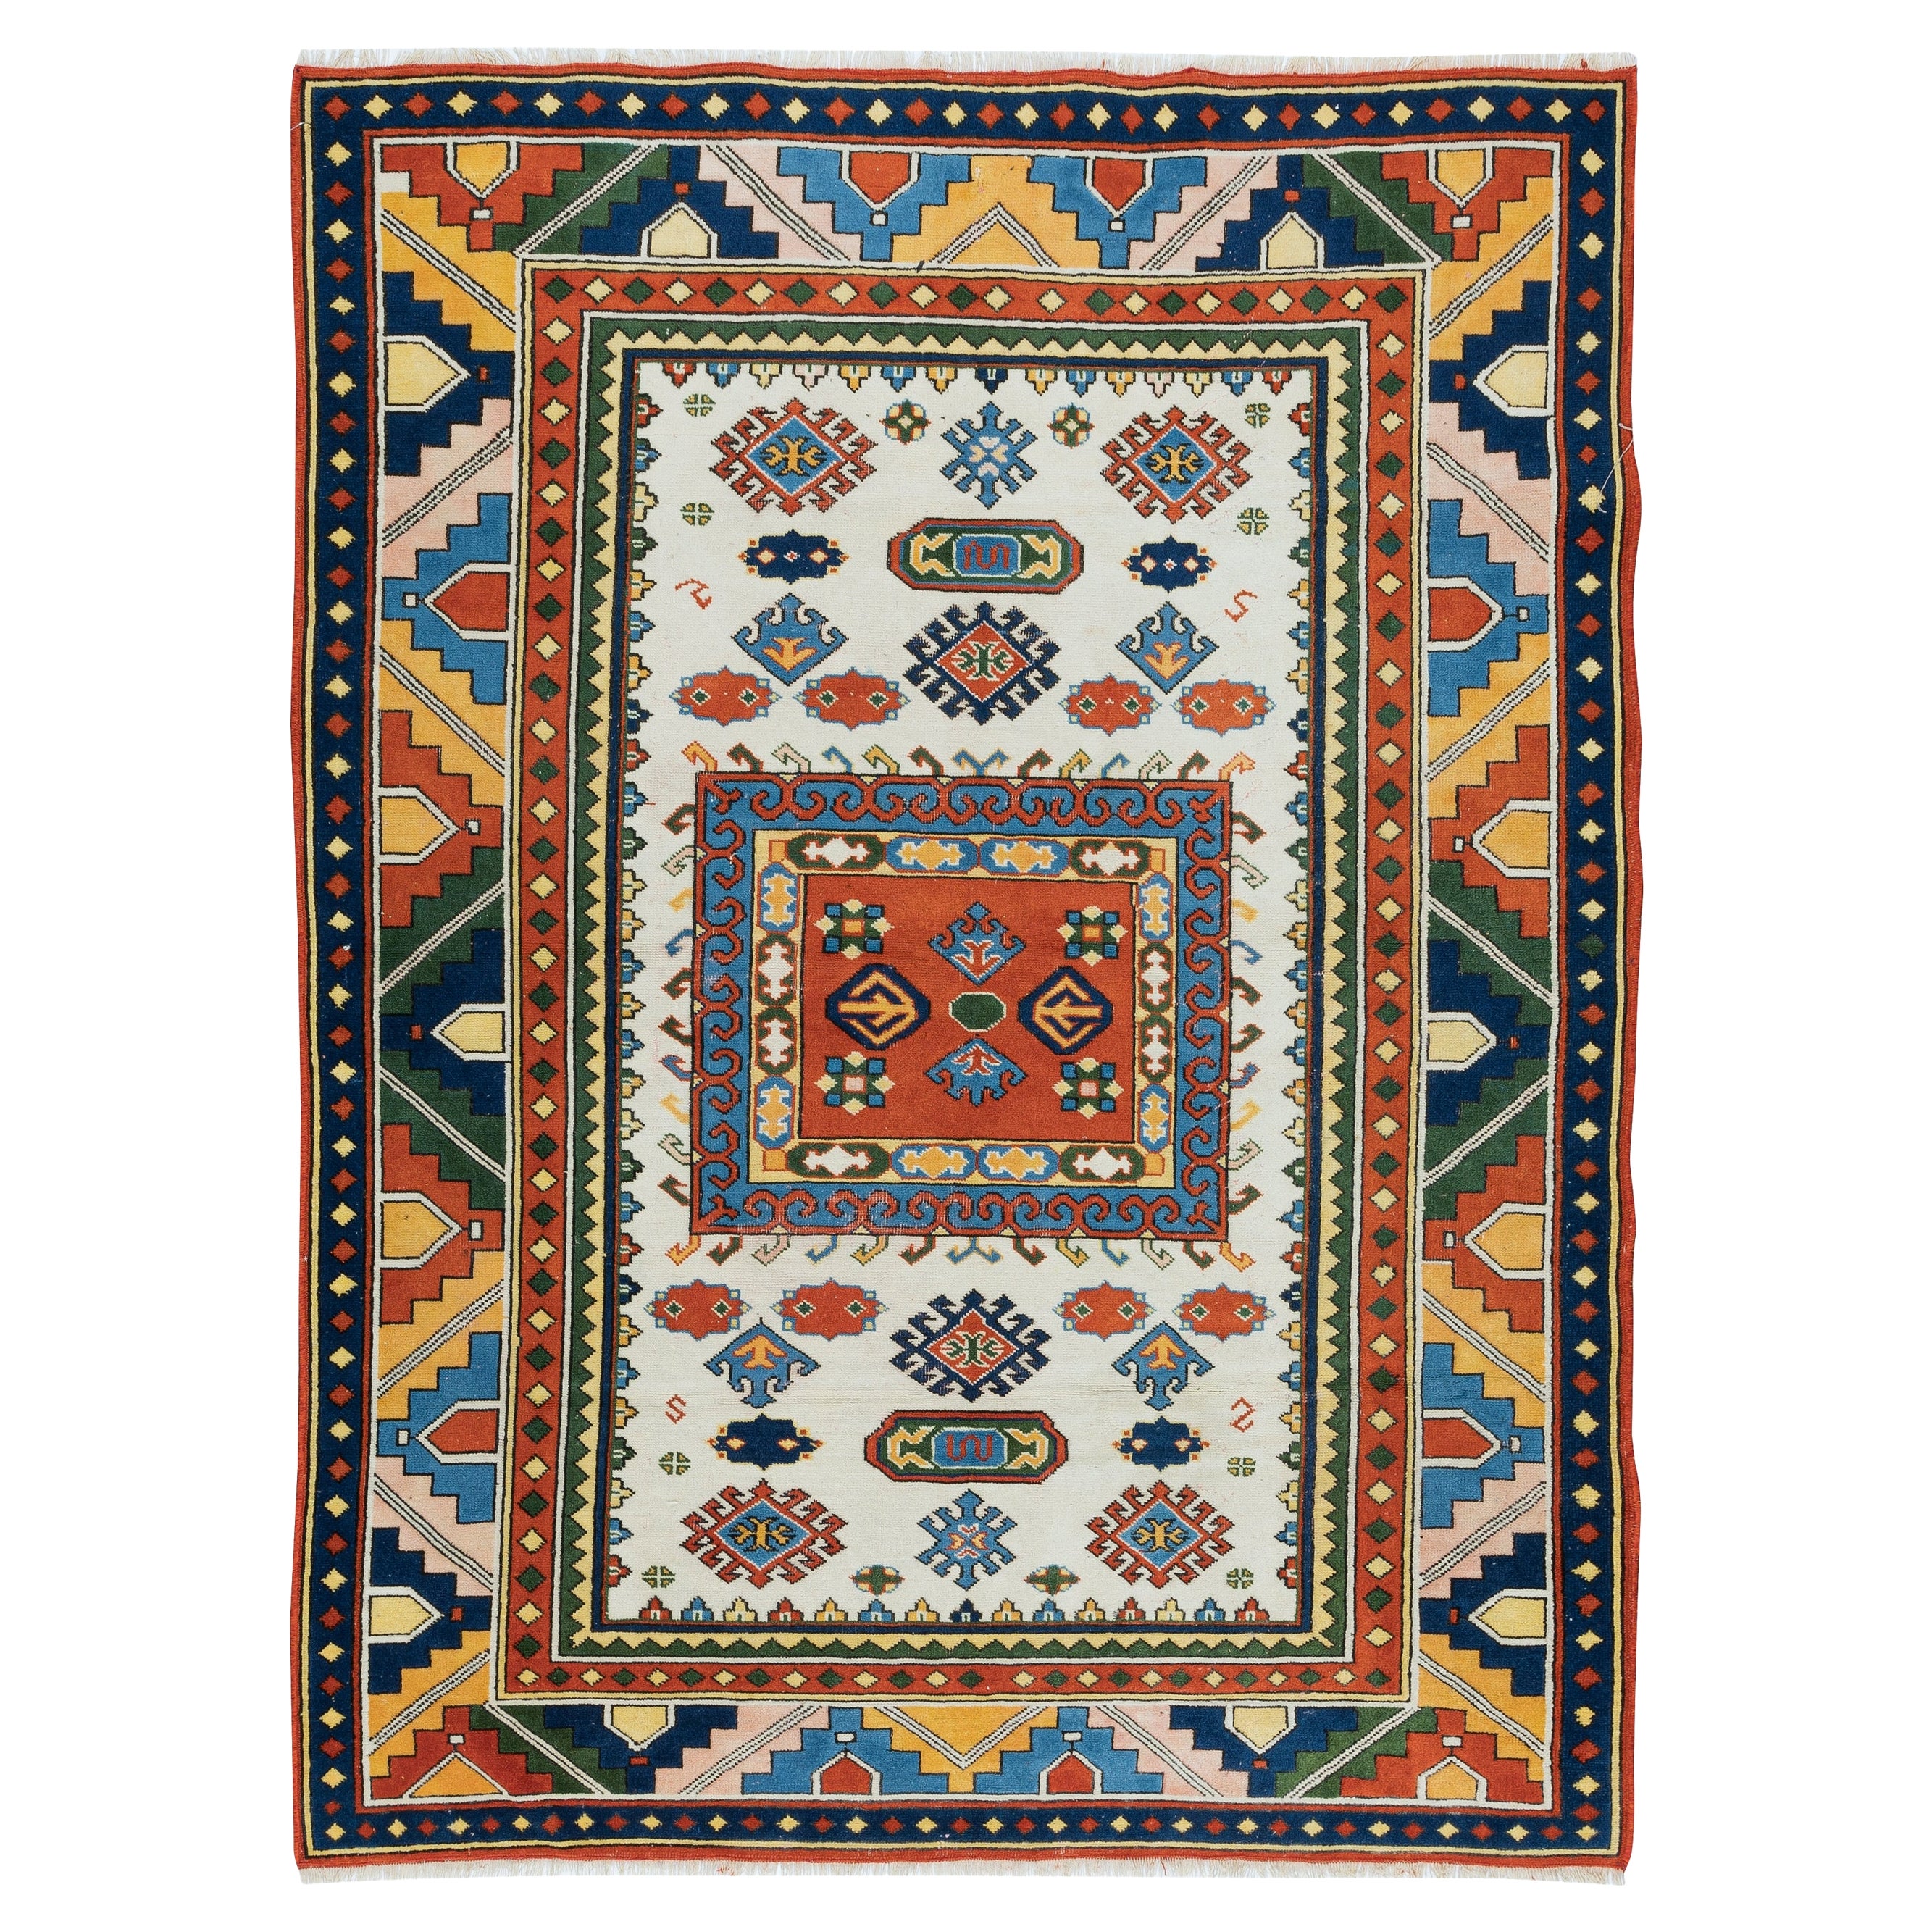 4x5.6 Ft Colorful Accent Rug, Vintage Turkish Carpet, Handmade Floor Covering